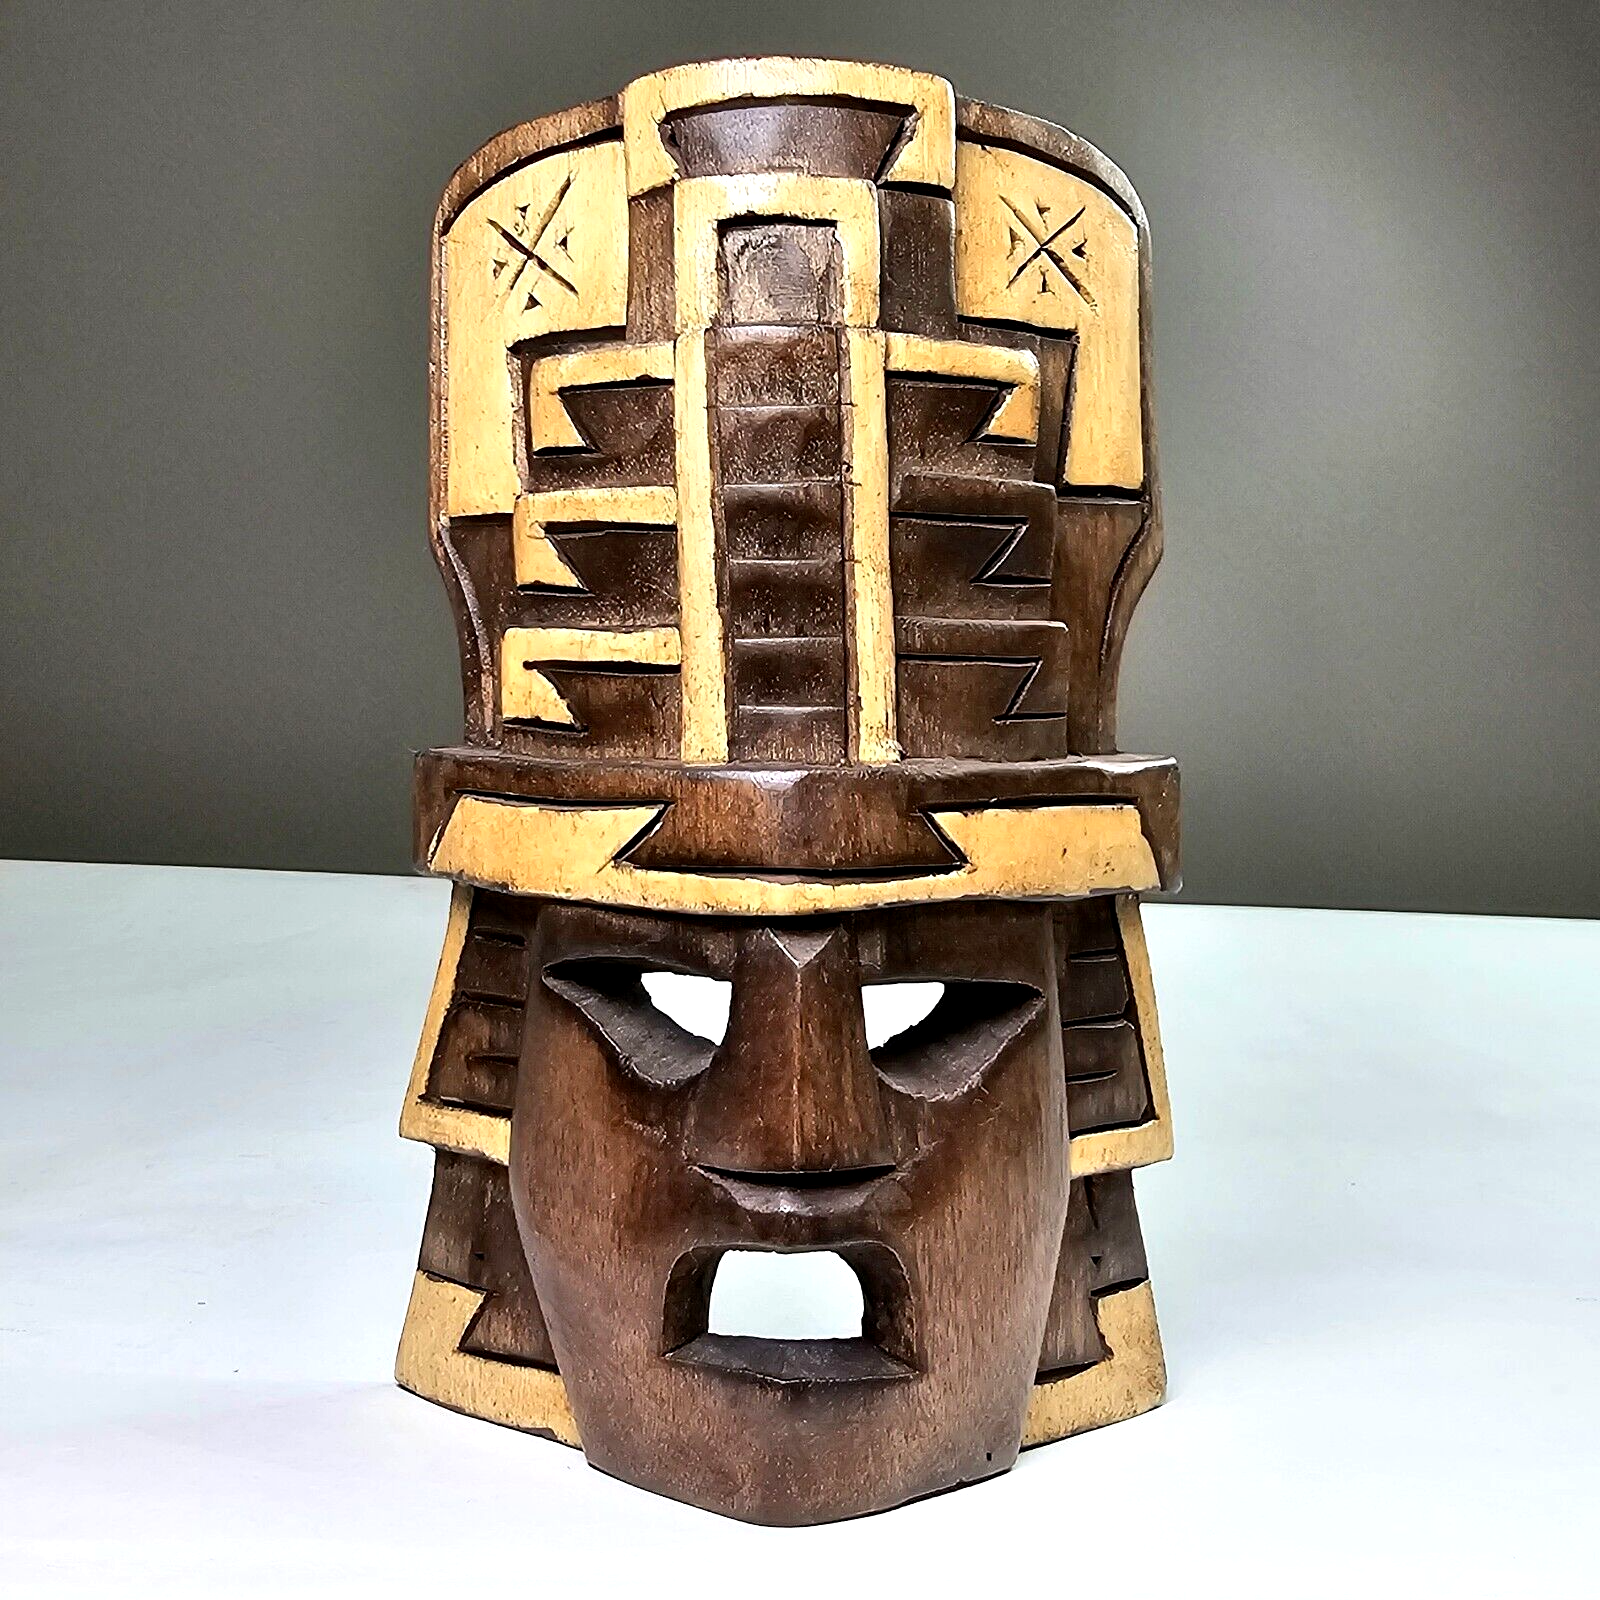 Primary image for Vintage Hand Carved Wood Tribal Mask 2 Tone Light and Dark Décor 7.25x4.5in